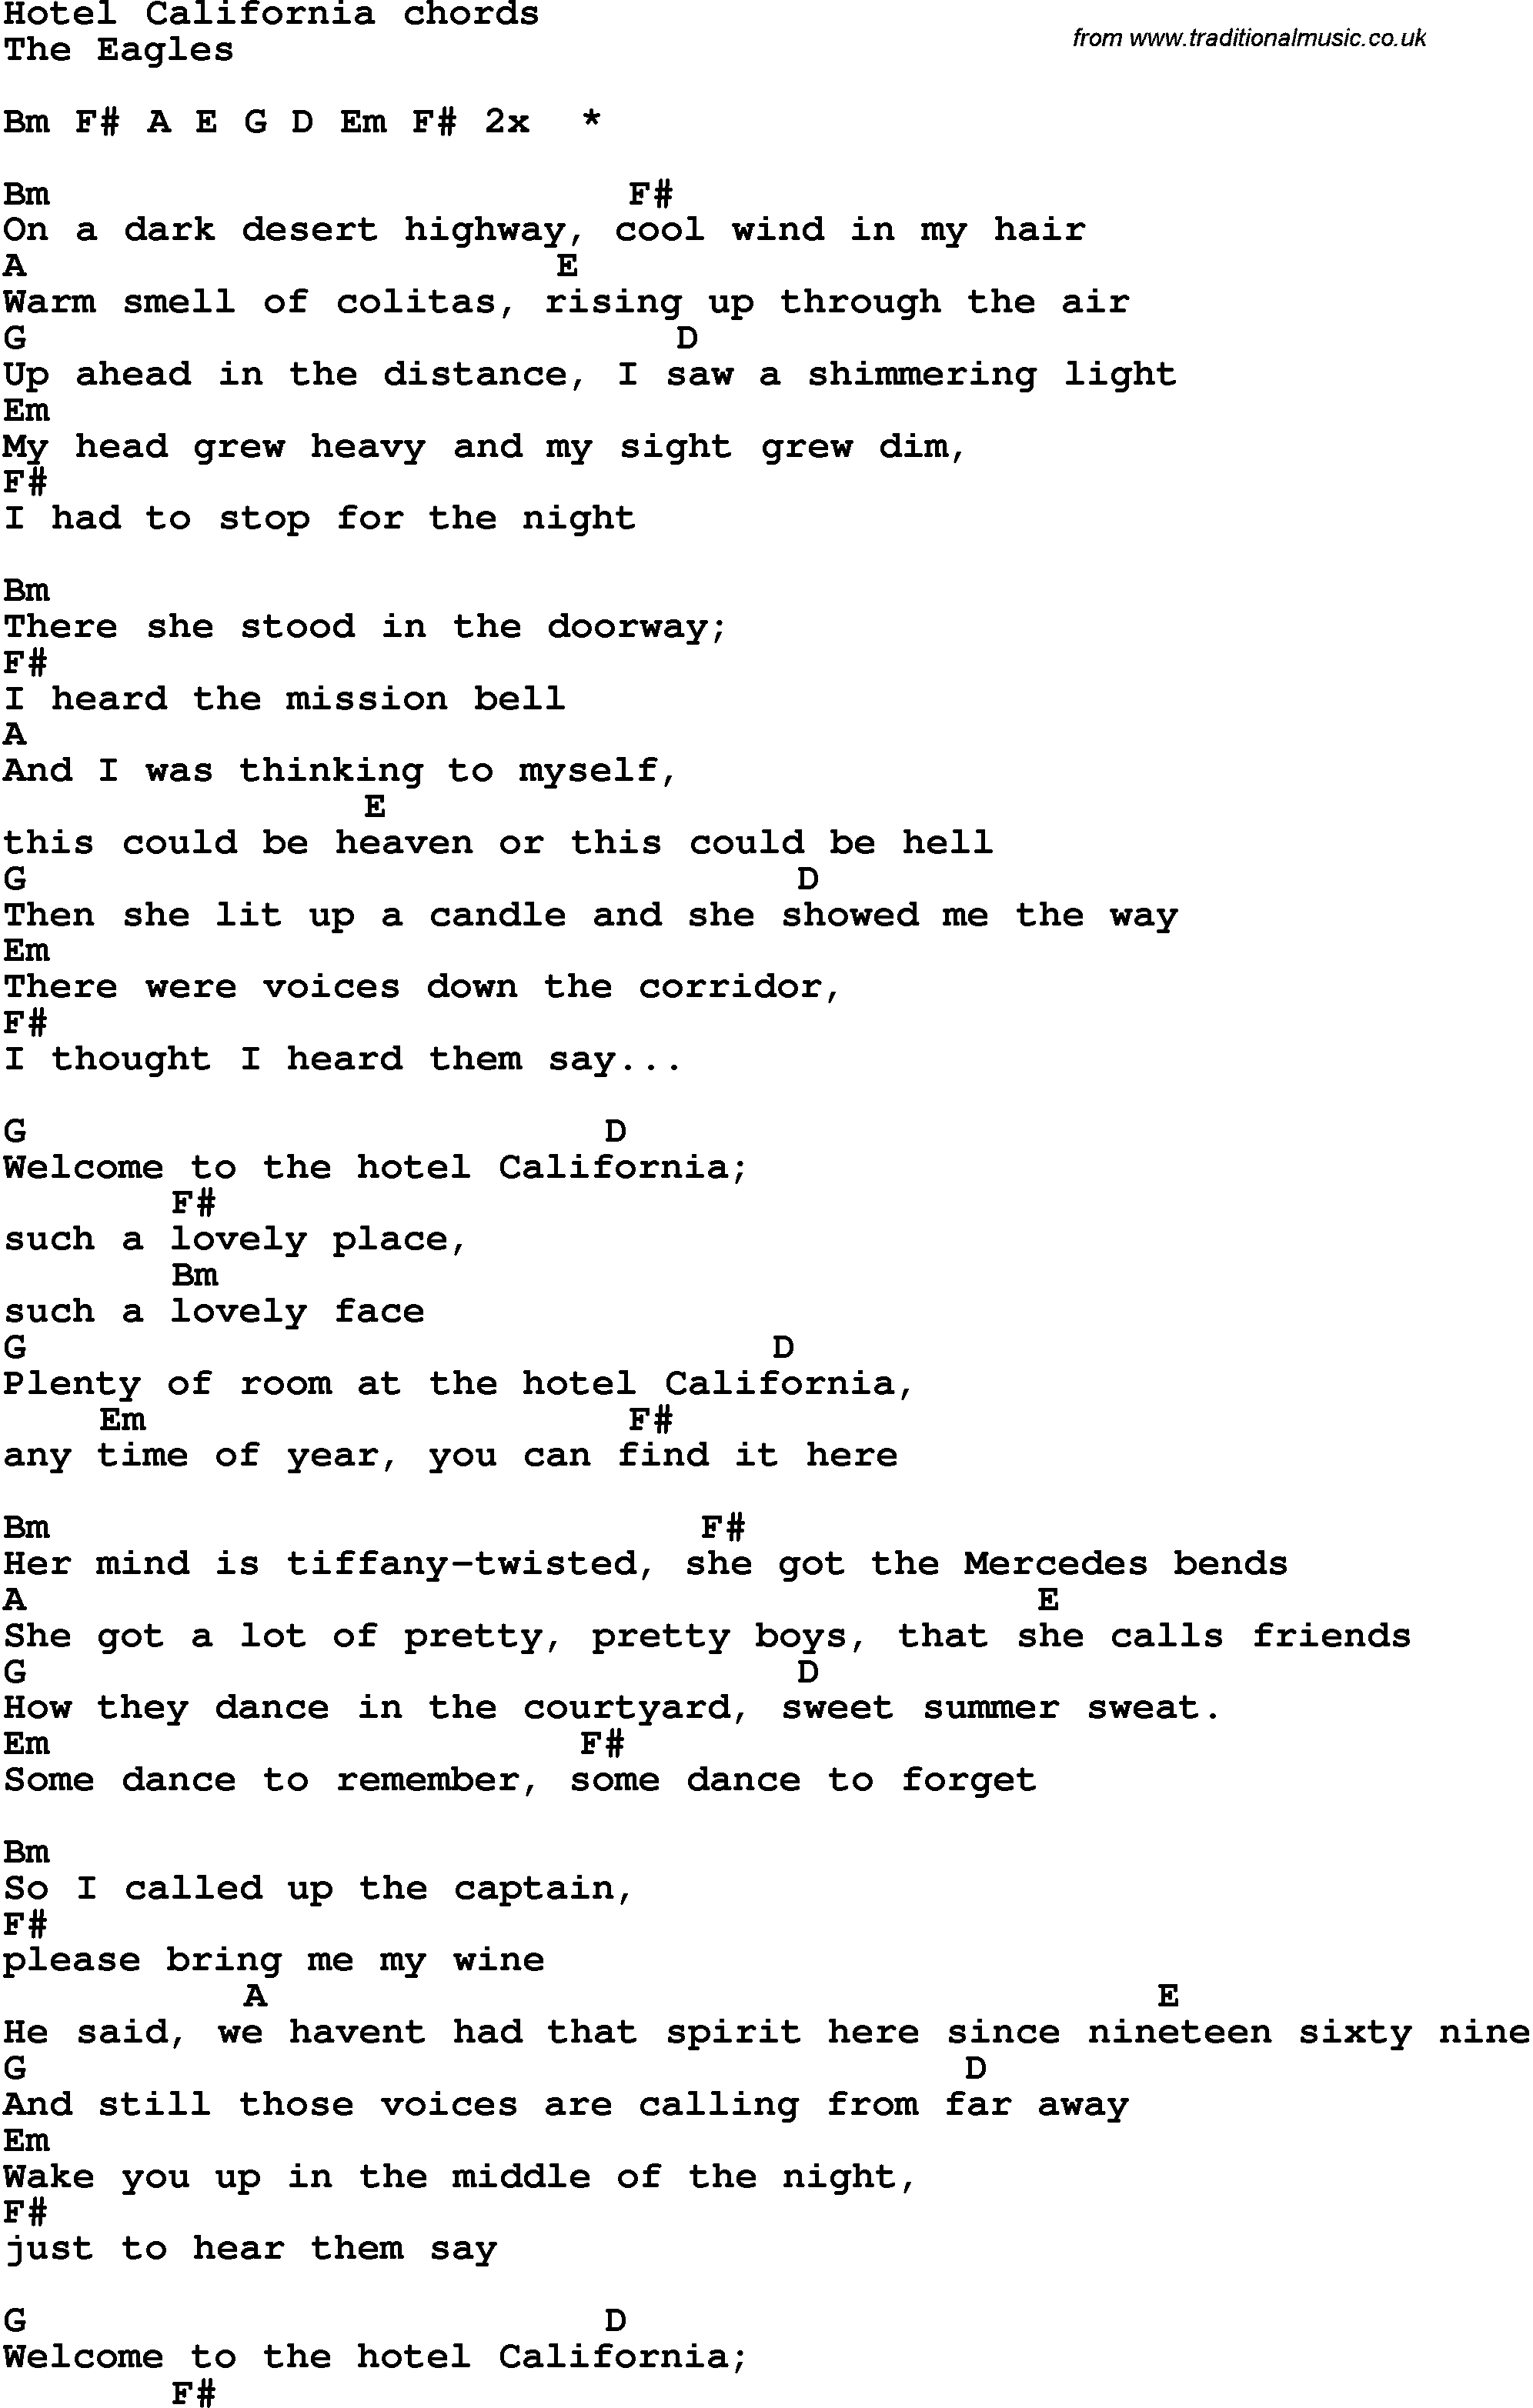 Song Lyrics With Guitar Chords For Hotel California - Free Printable Song Lyrics With Guitar Chords